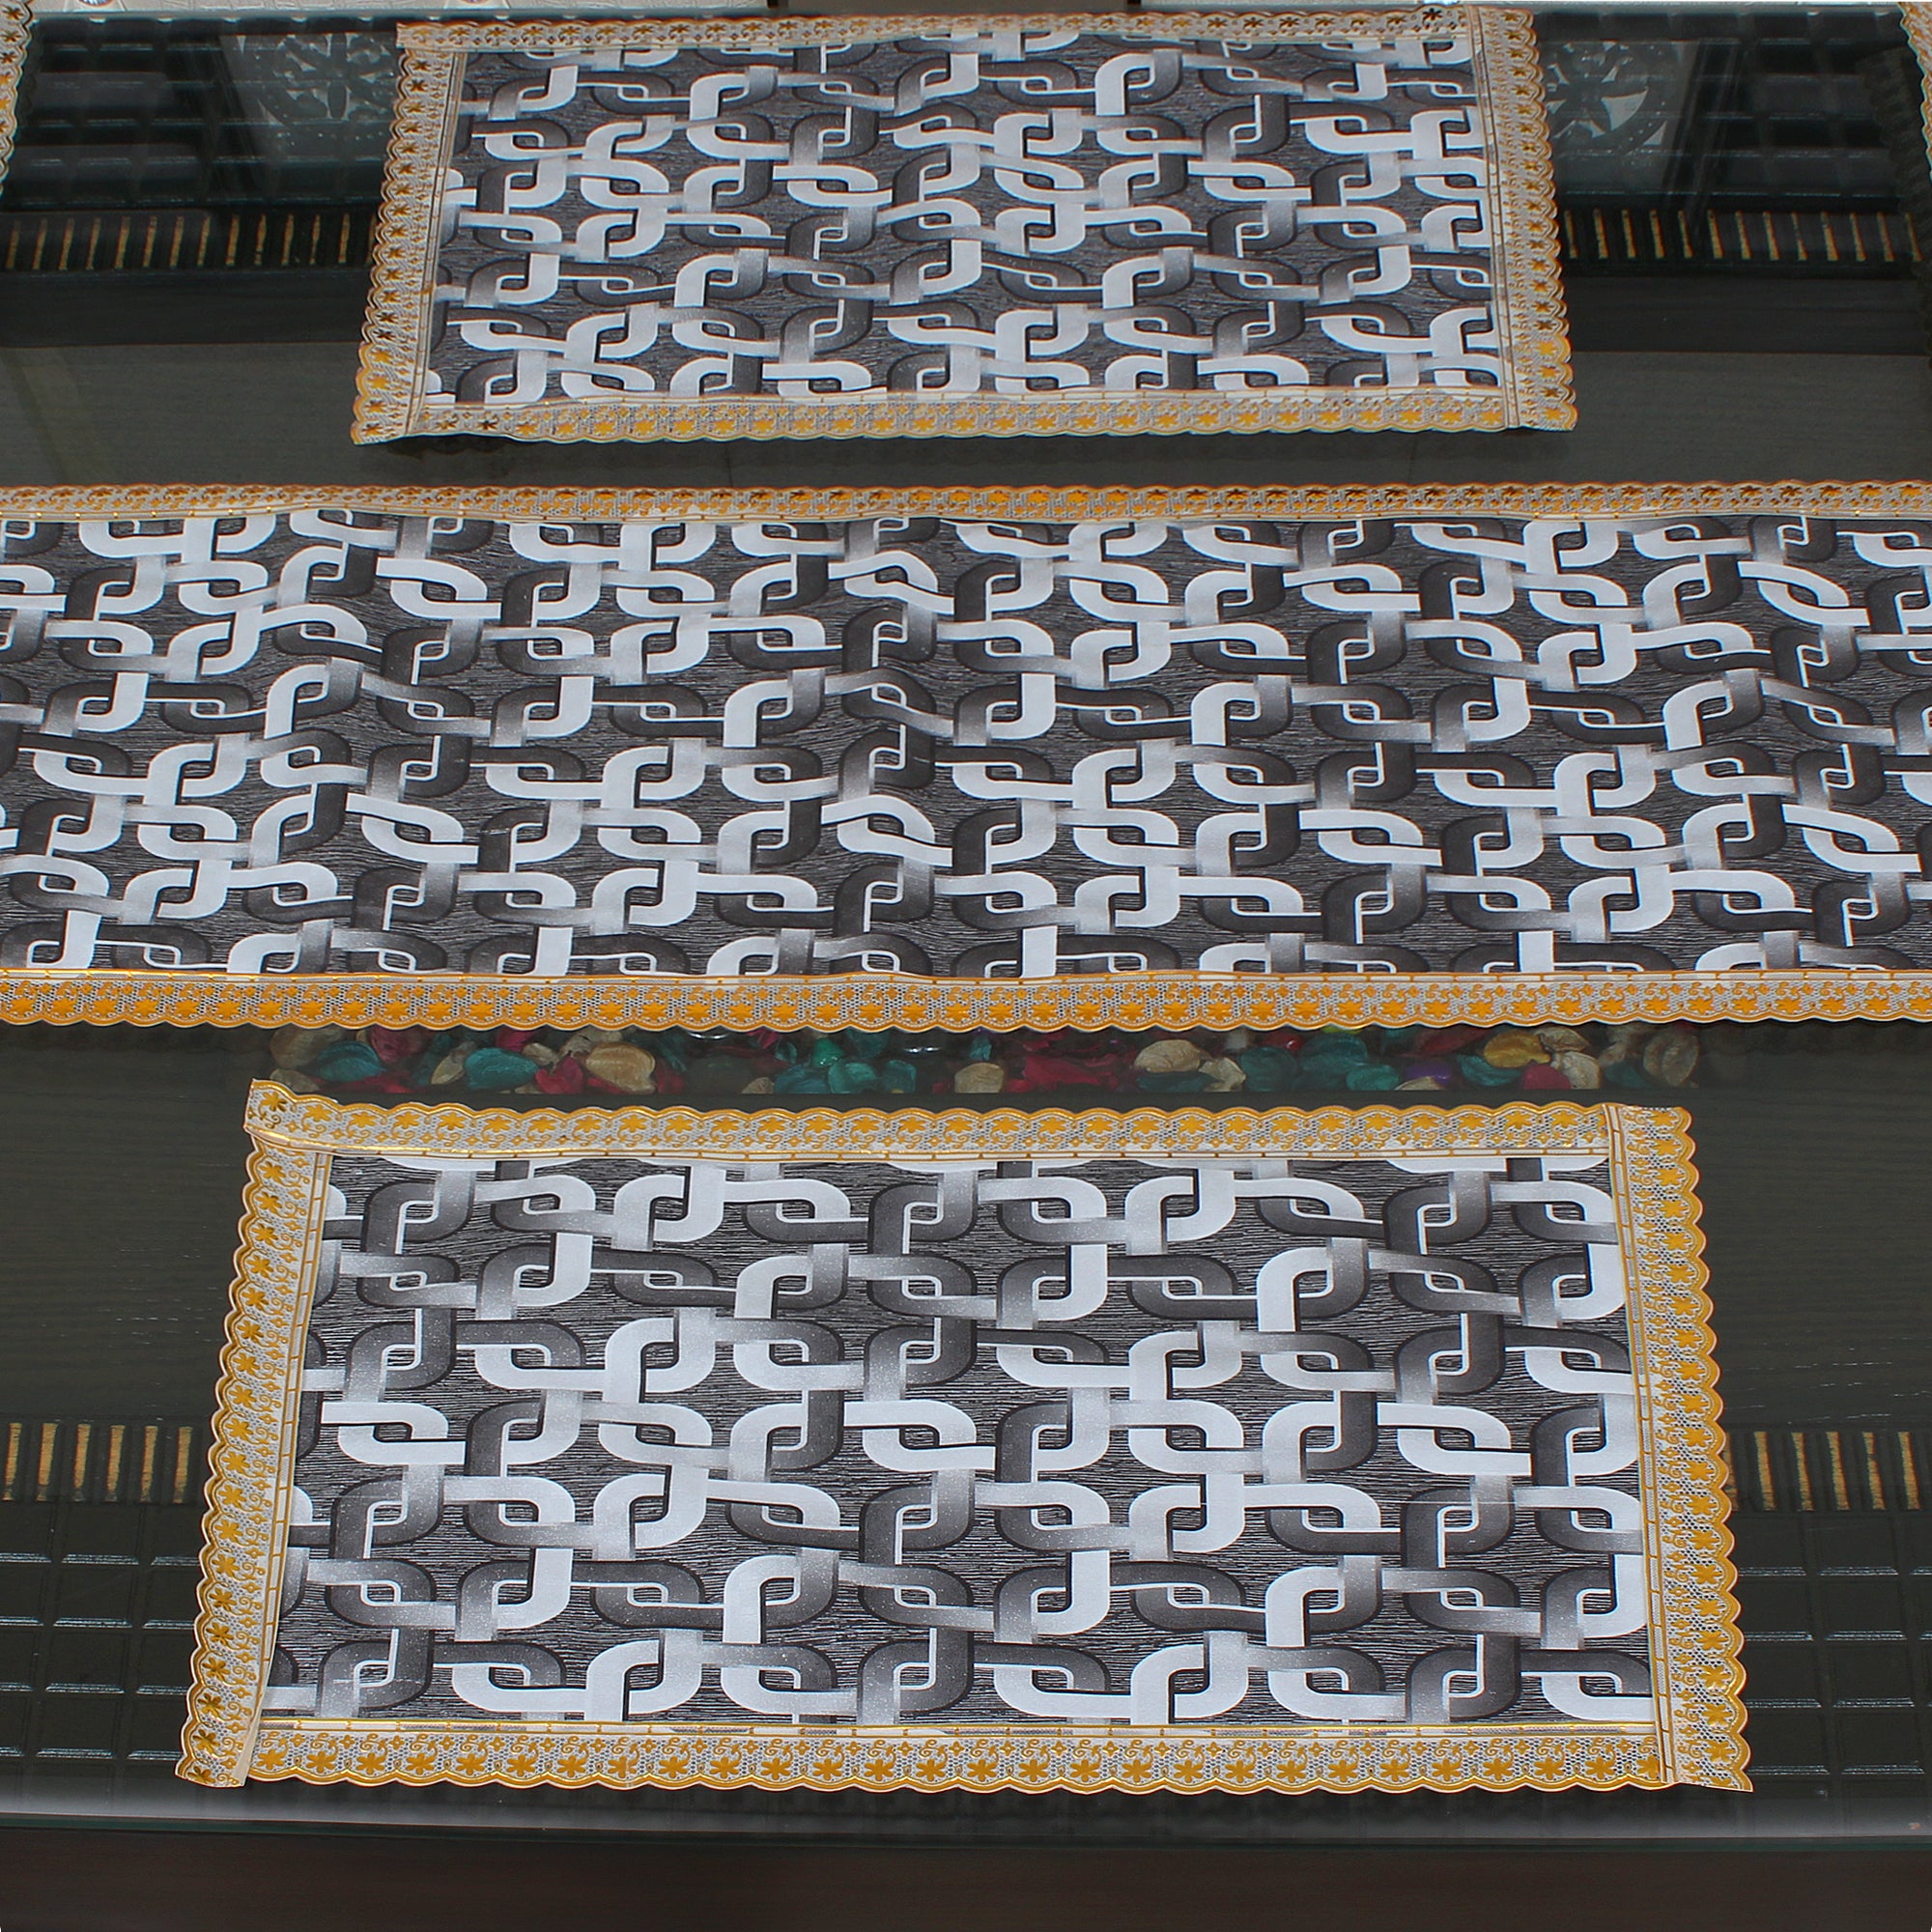 Waterproof & Dustproof Dining Table Runner With 6 Placemats, SA38 - Dream Care Furnishings Private Limited